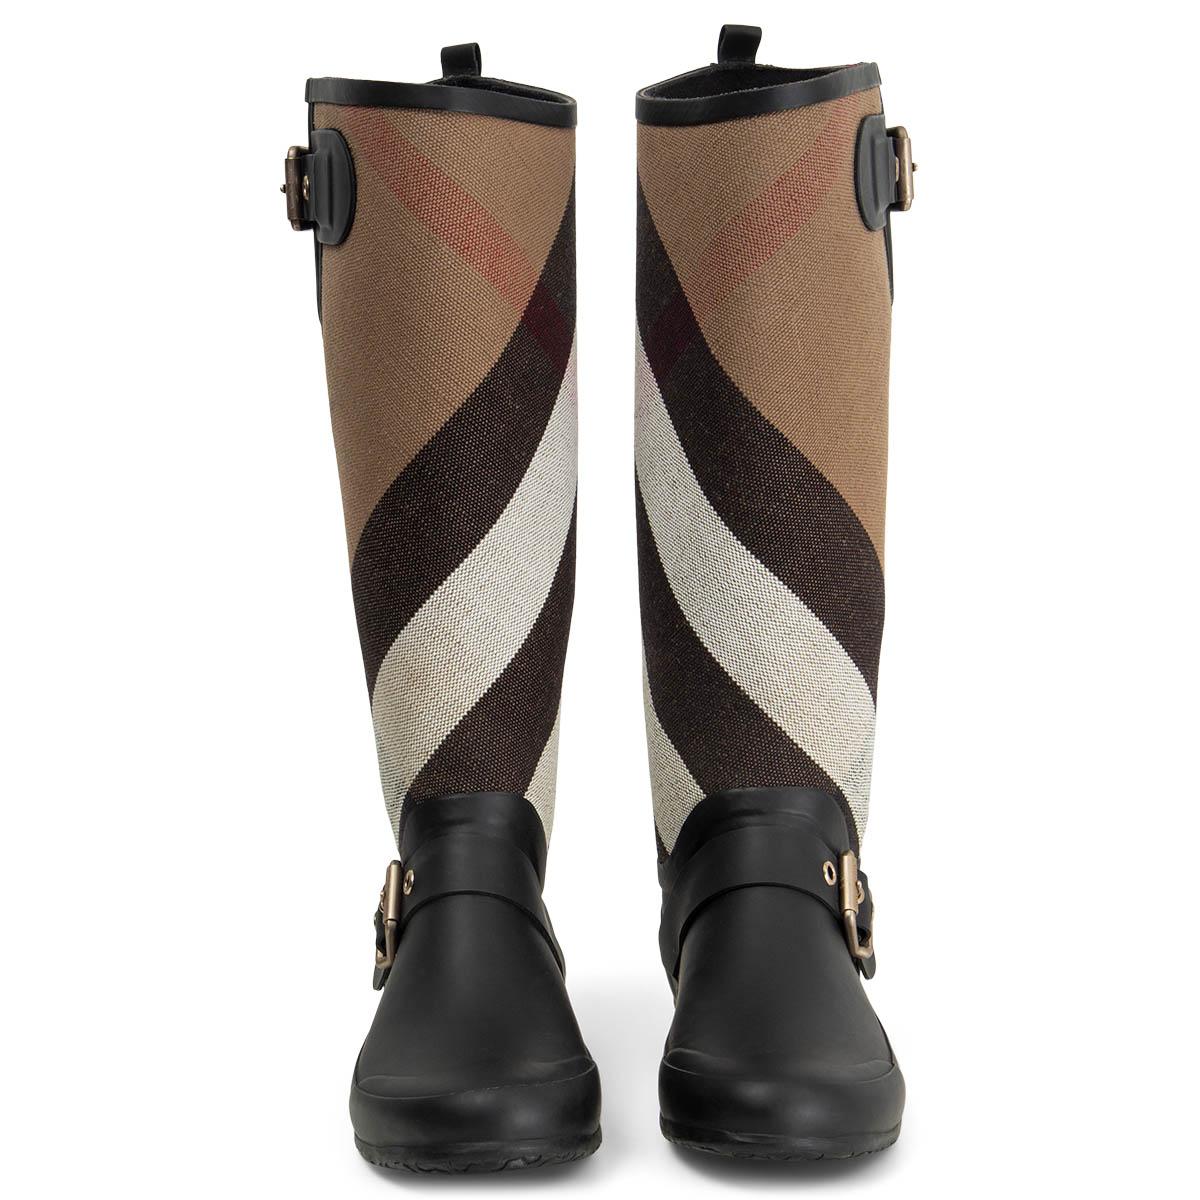 100% authentic Burberry rain boots in black rubber a and camel, white, red and black calssic plaid canvas featuring buckle details on the side and top. Have been worn and are in excellent condition. 

Measurements
Imprinted Size	35
Shoe